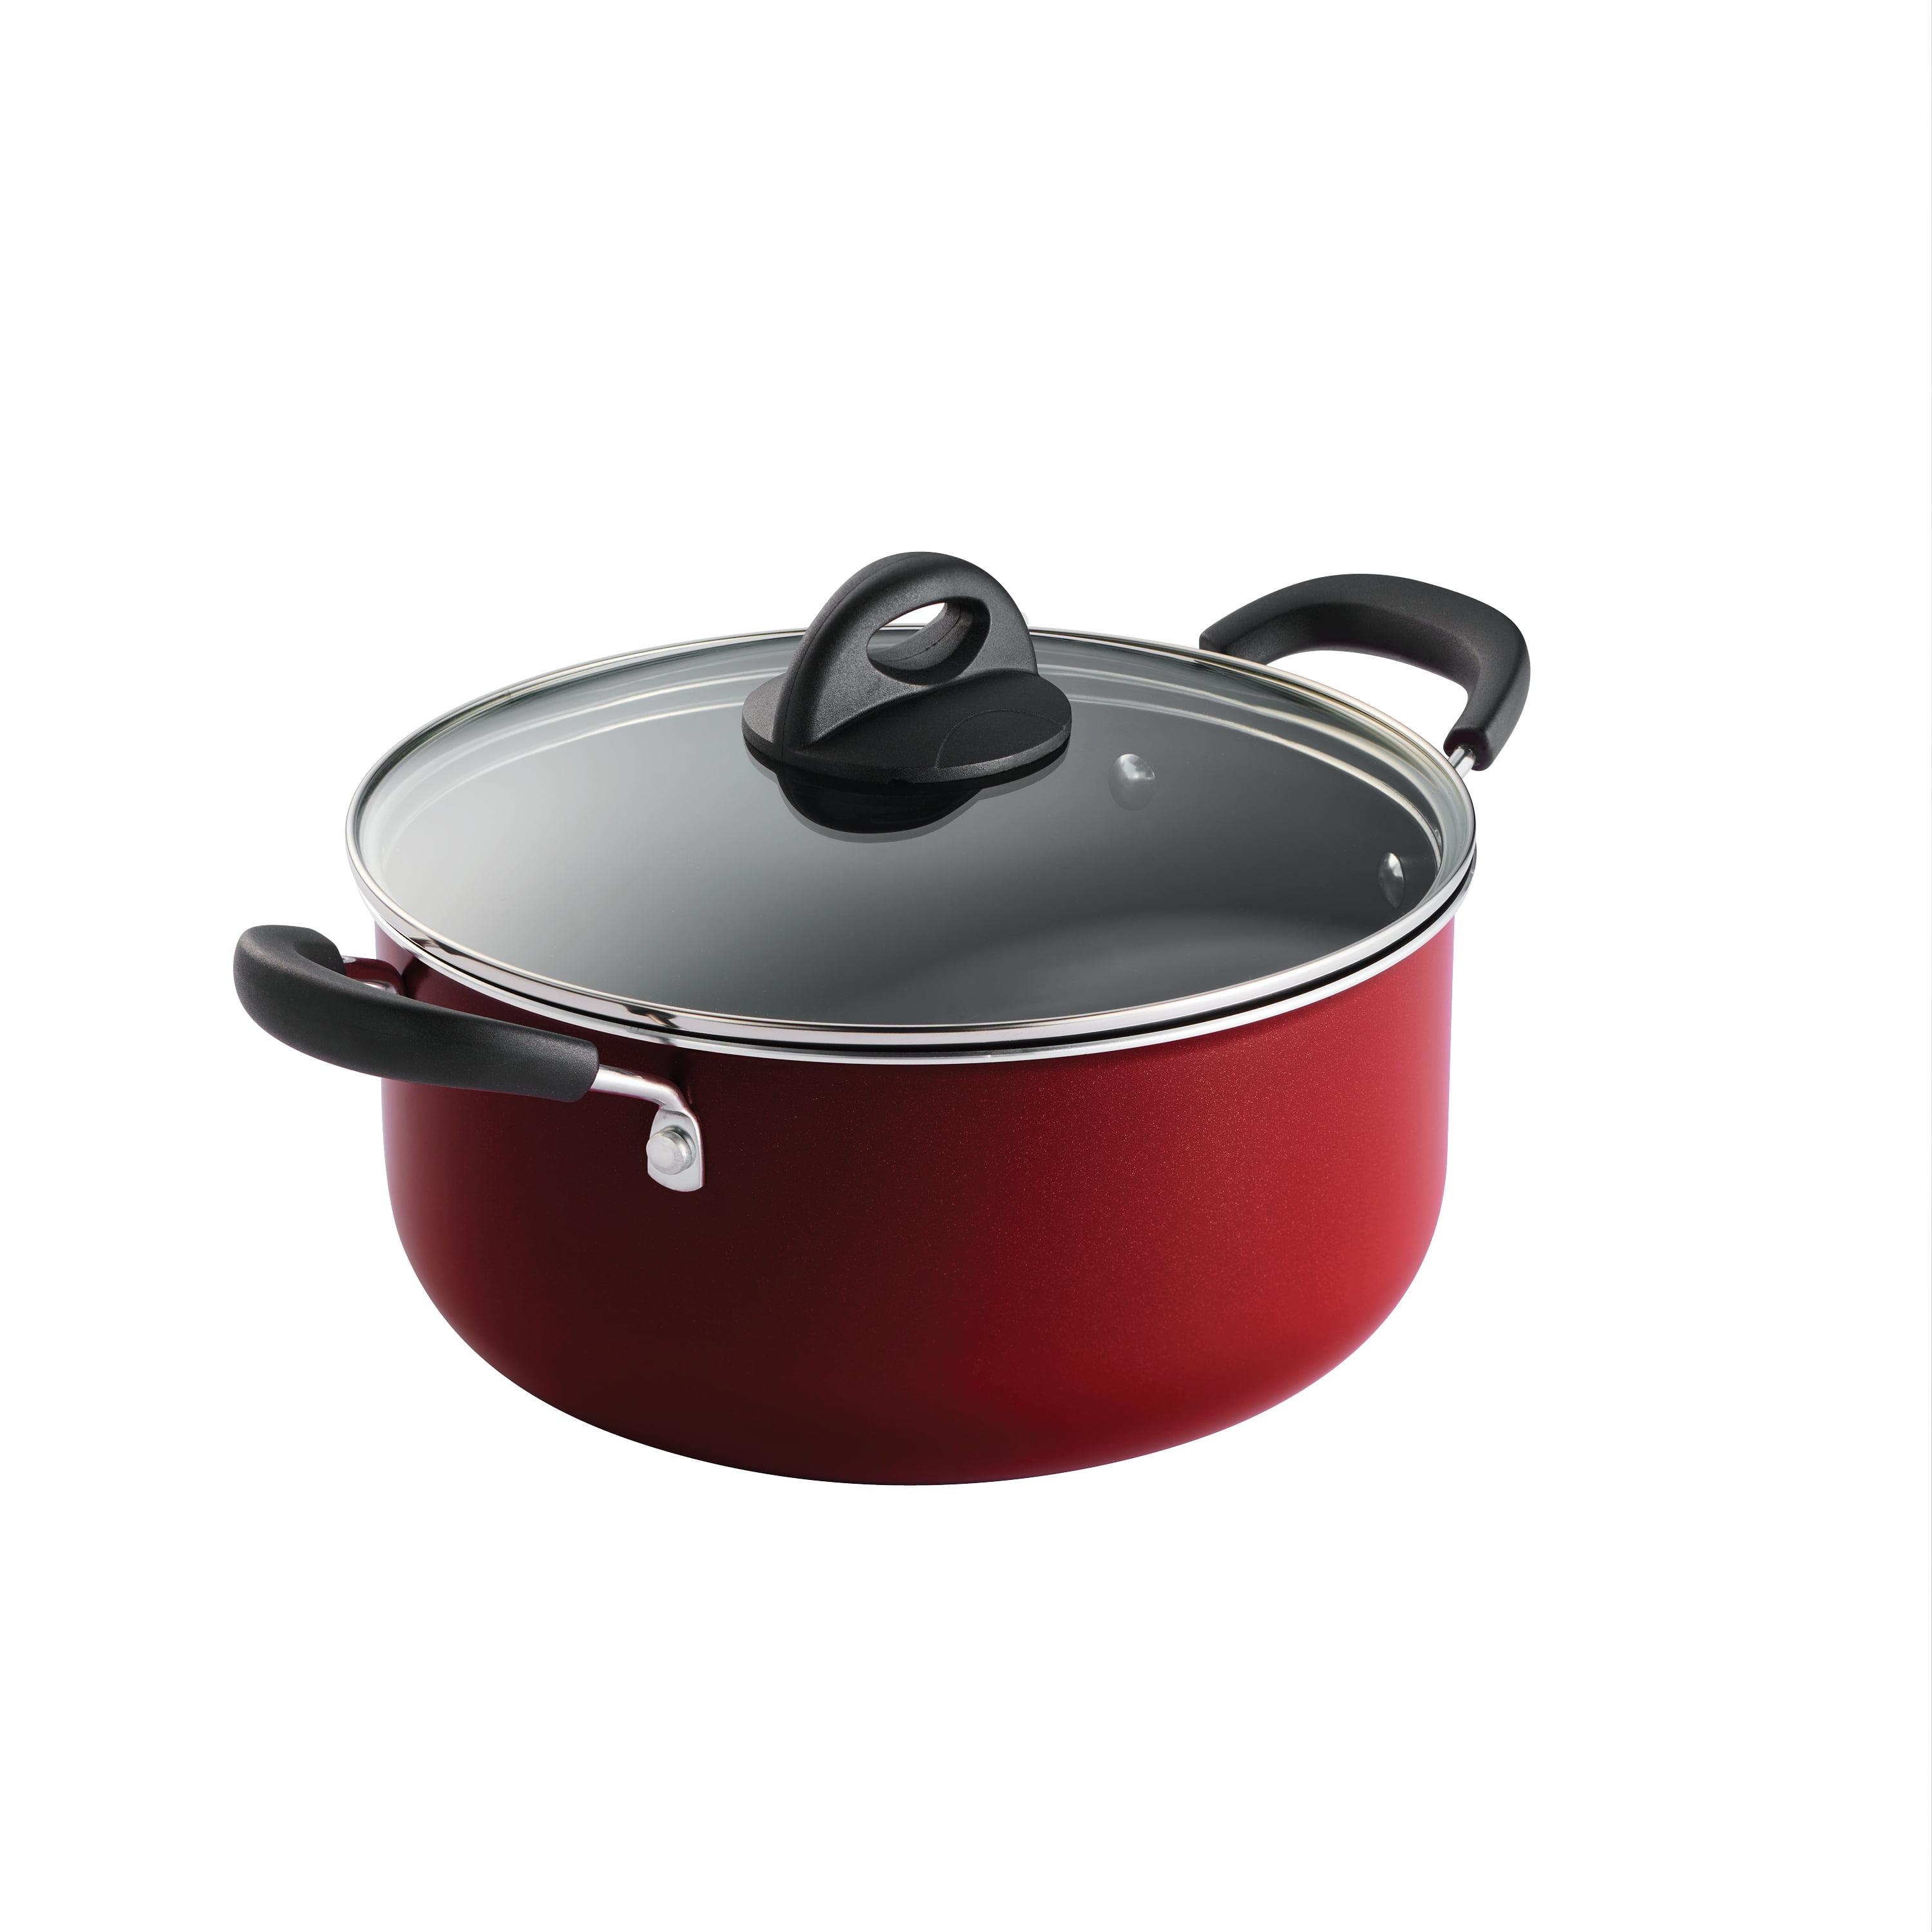 All in One Plus Pan, 5 Qt Ceramic Non Stick - Charcoal Gray - Tramontina US